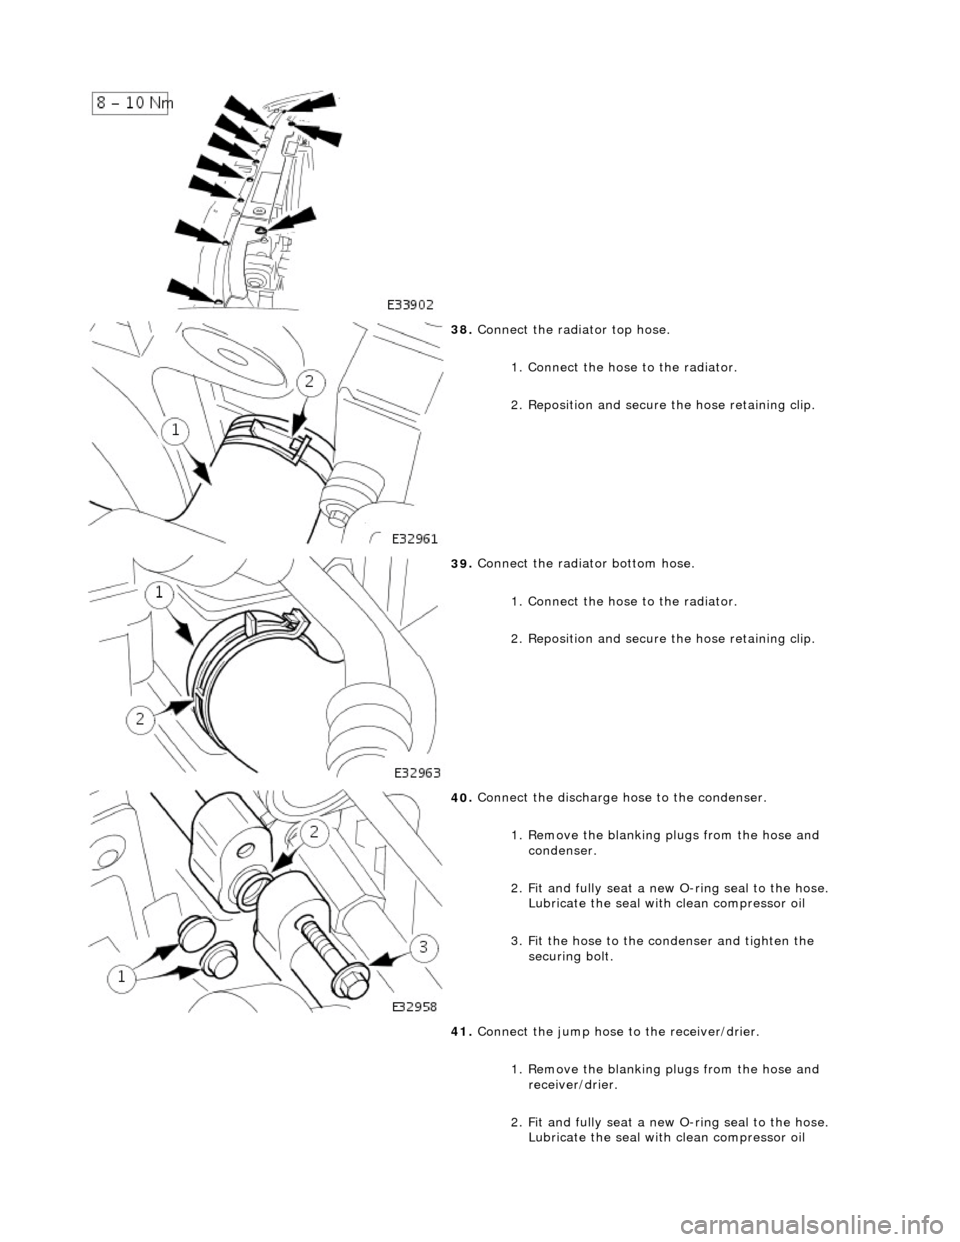 JAGUAR X308 1998 2.G User Guide  
 
38
. 
Connect the radiator top hose. 
1. Connect the hose to the radiator. 
2. Reposition and secure  the hose retaining clip. 
 
39
 . 
Connect the radiator bottom hose. 
1. Connect the hose to t